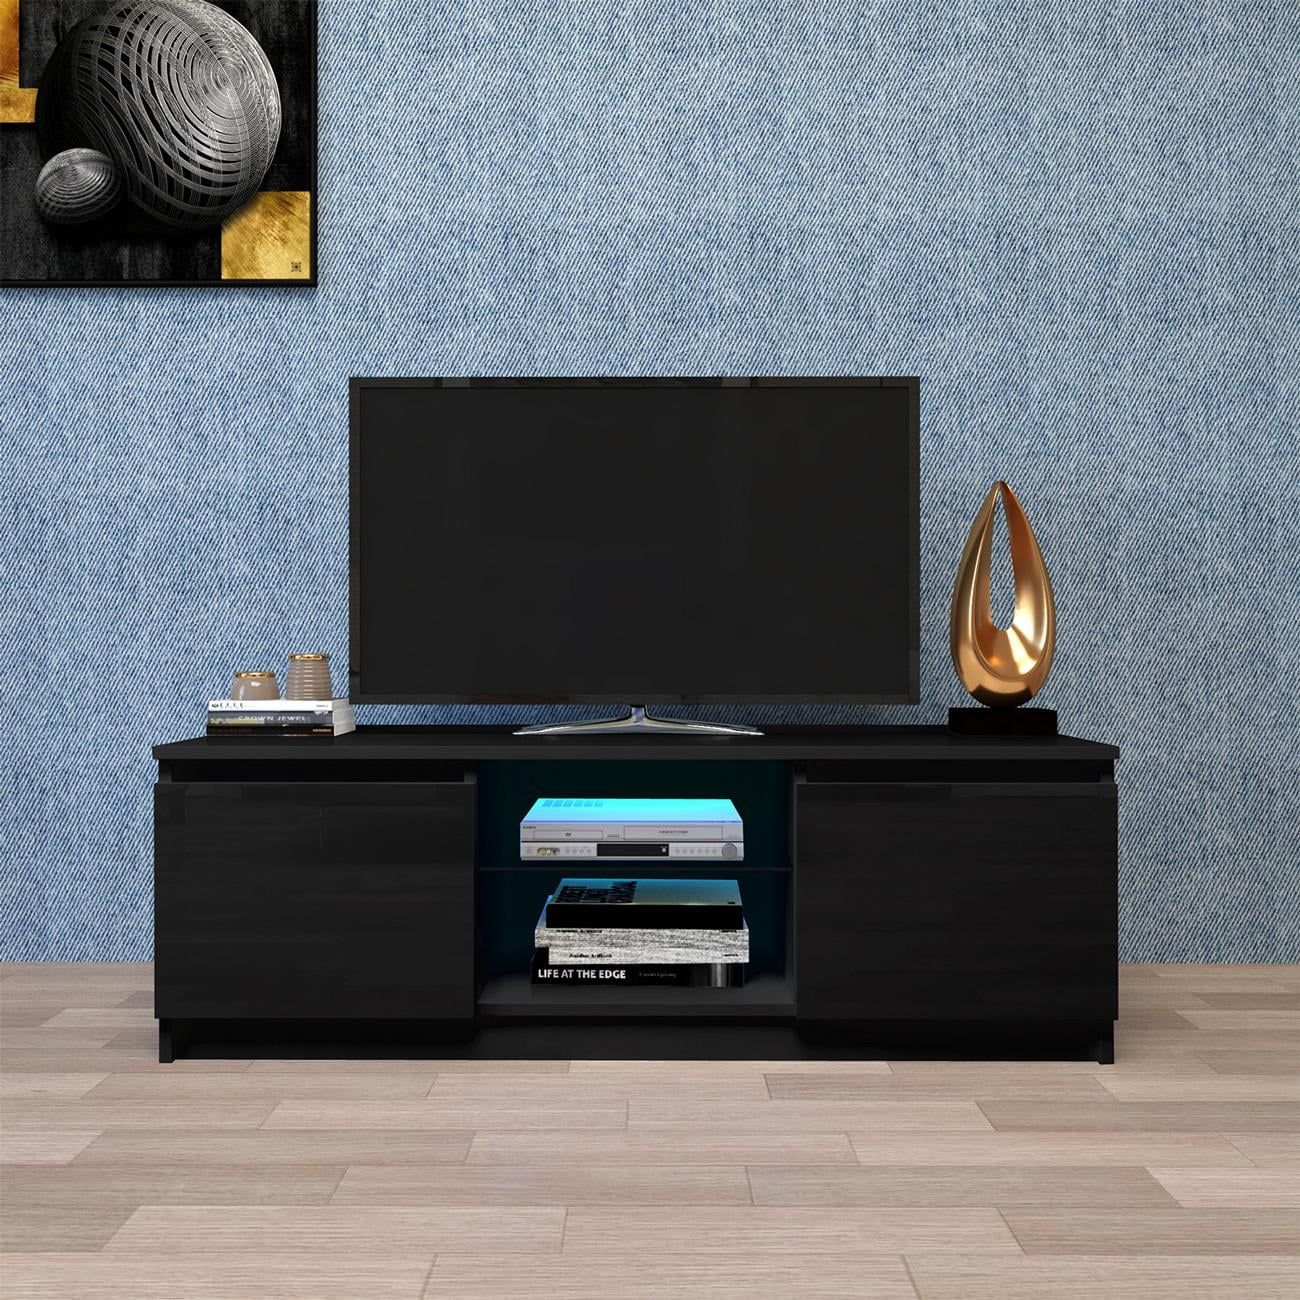 Tv Stand With Storage Drawers Shelves Led Rgb Lights, For Flat Tv 40 55 For Rgb Tv Entertainment Centers (View 3 of 20)